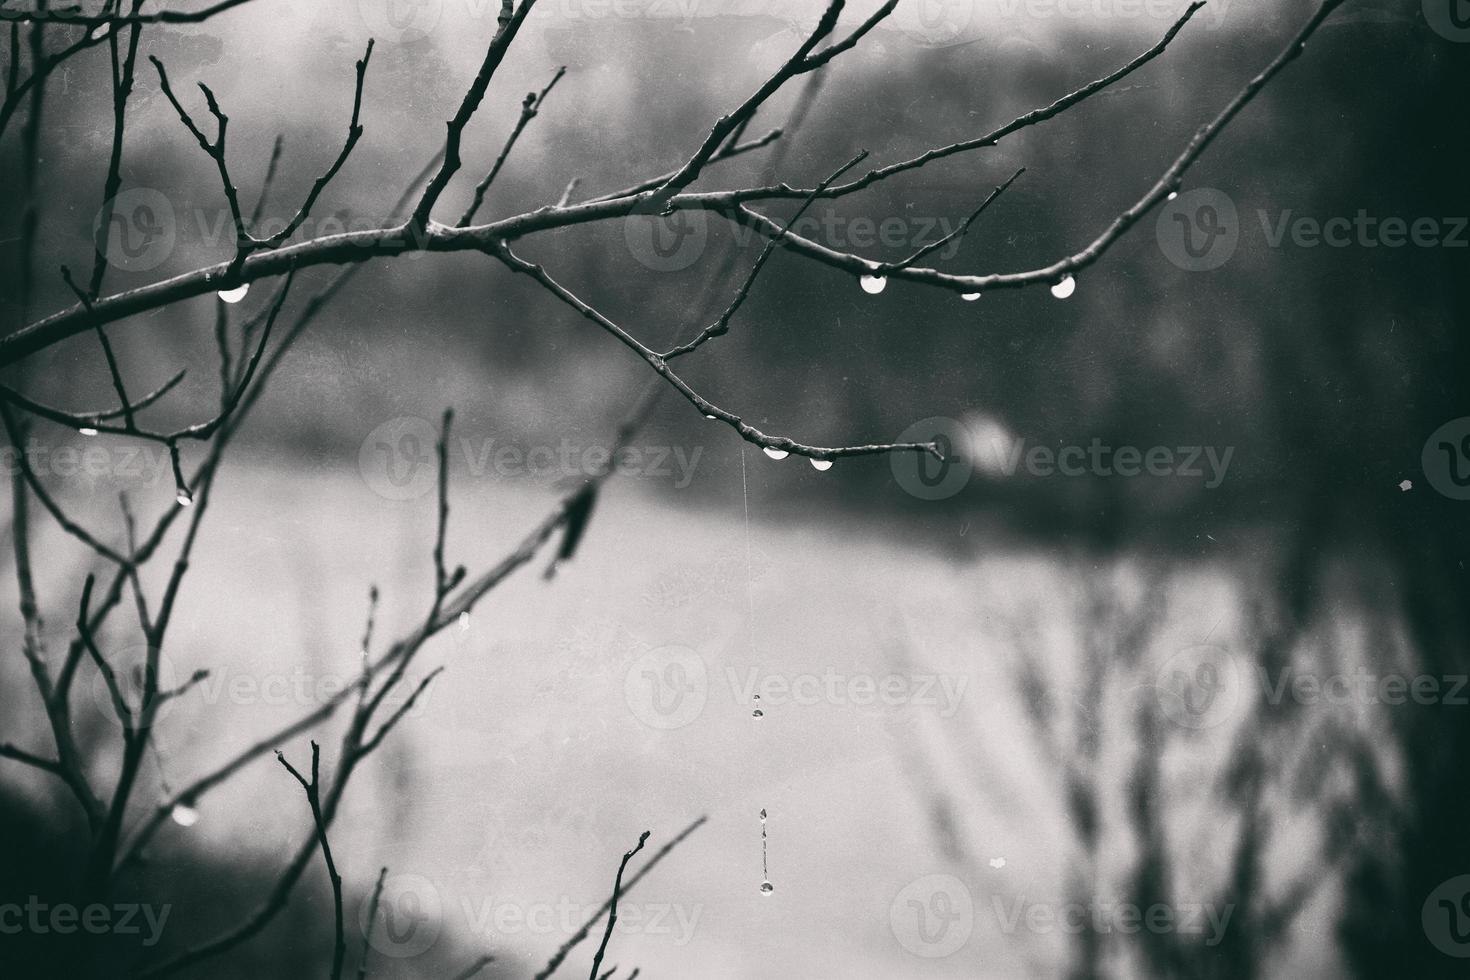 lonely leafless tree branches with drops of water after a November cold rain photo